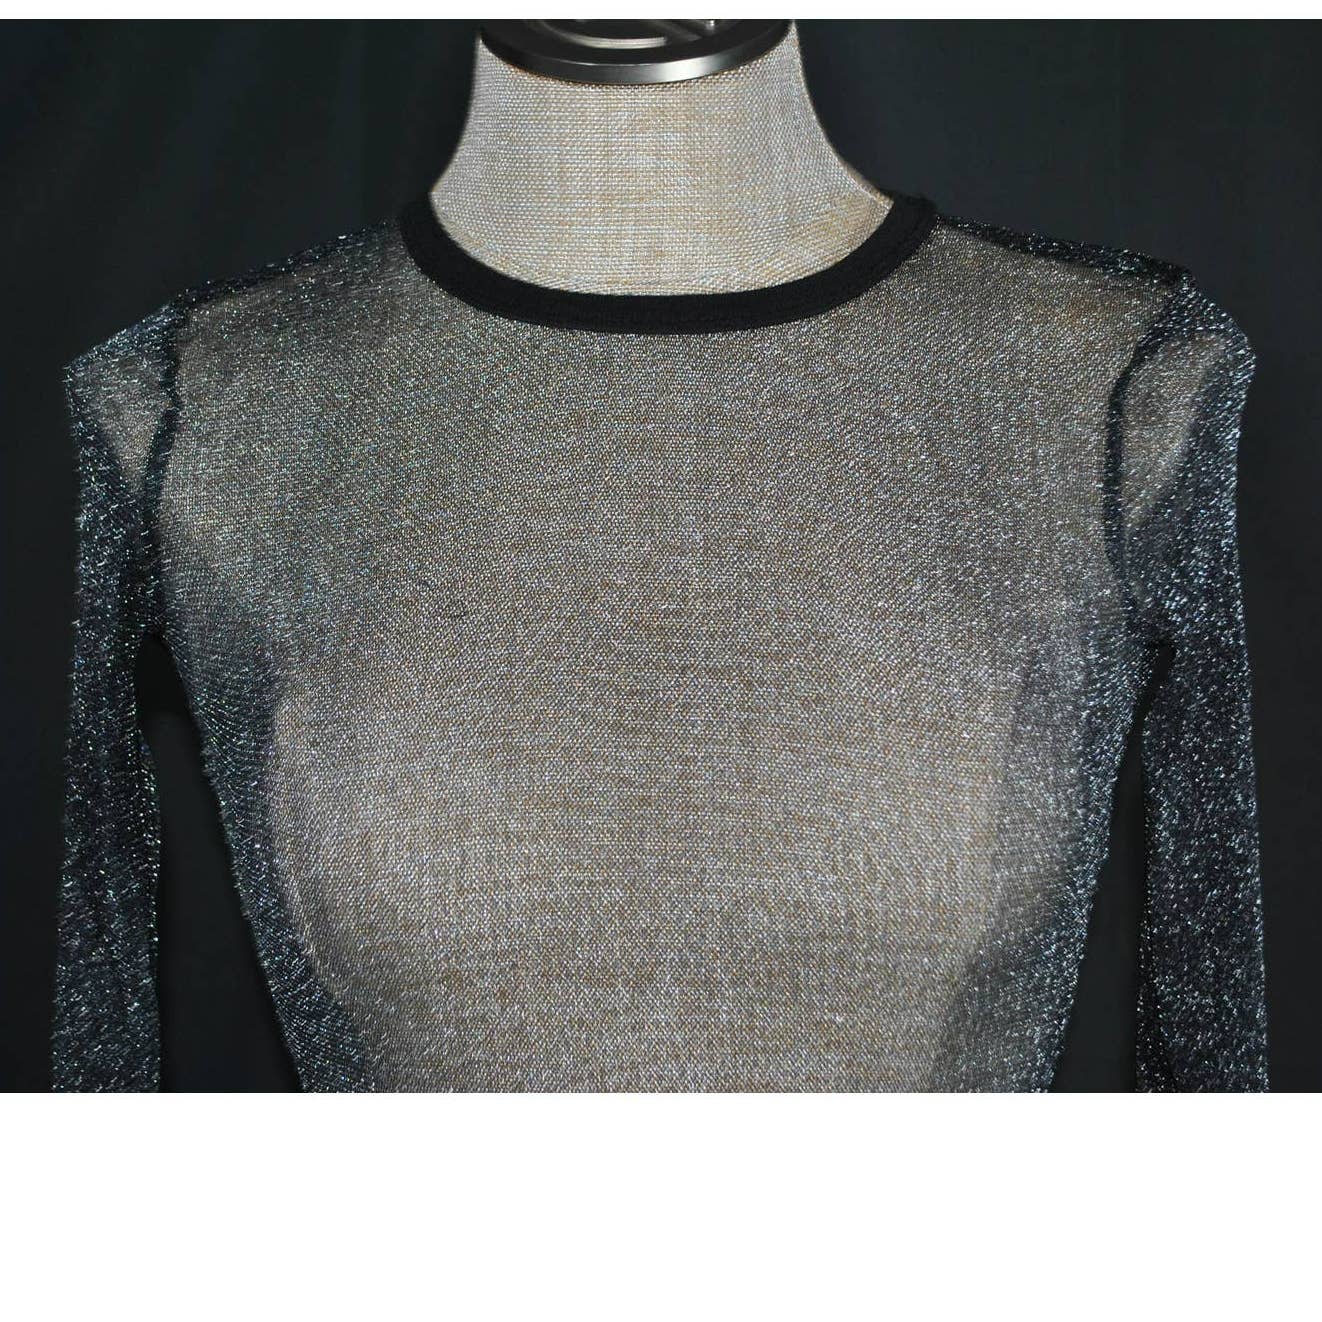 Out From Under Sheer Stretch Black Metallic  Long Sleeve Top - XS